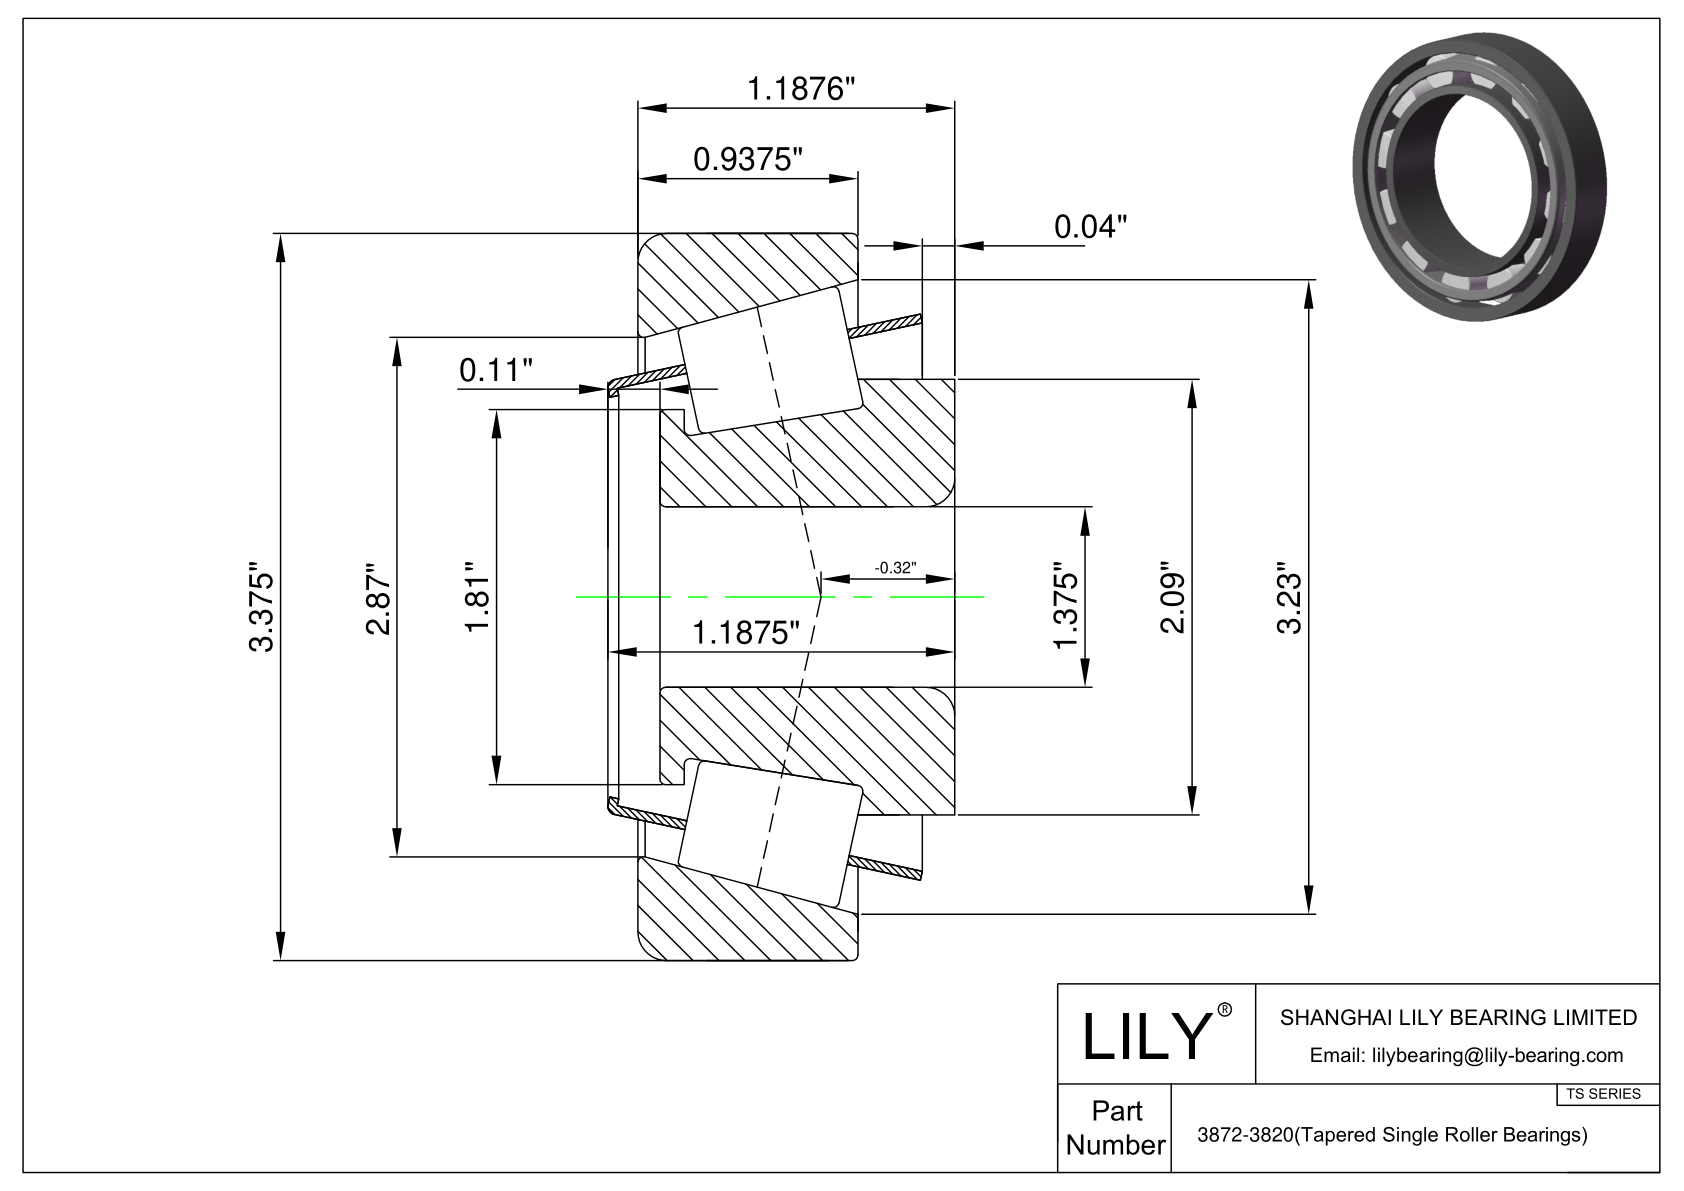 3872-3820 TS (Tapered Single Roller Bearings) (Imperial) cad drawing